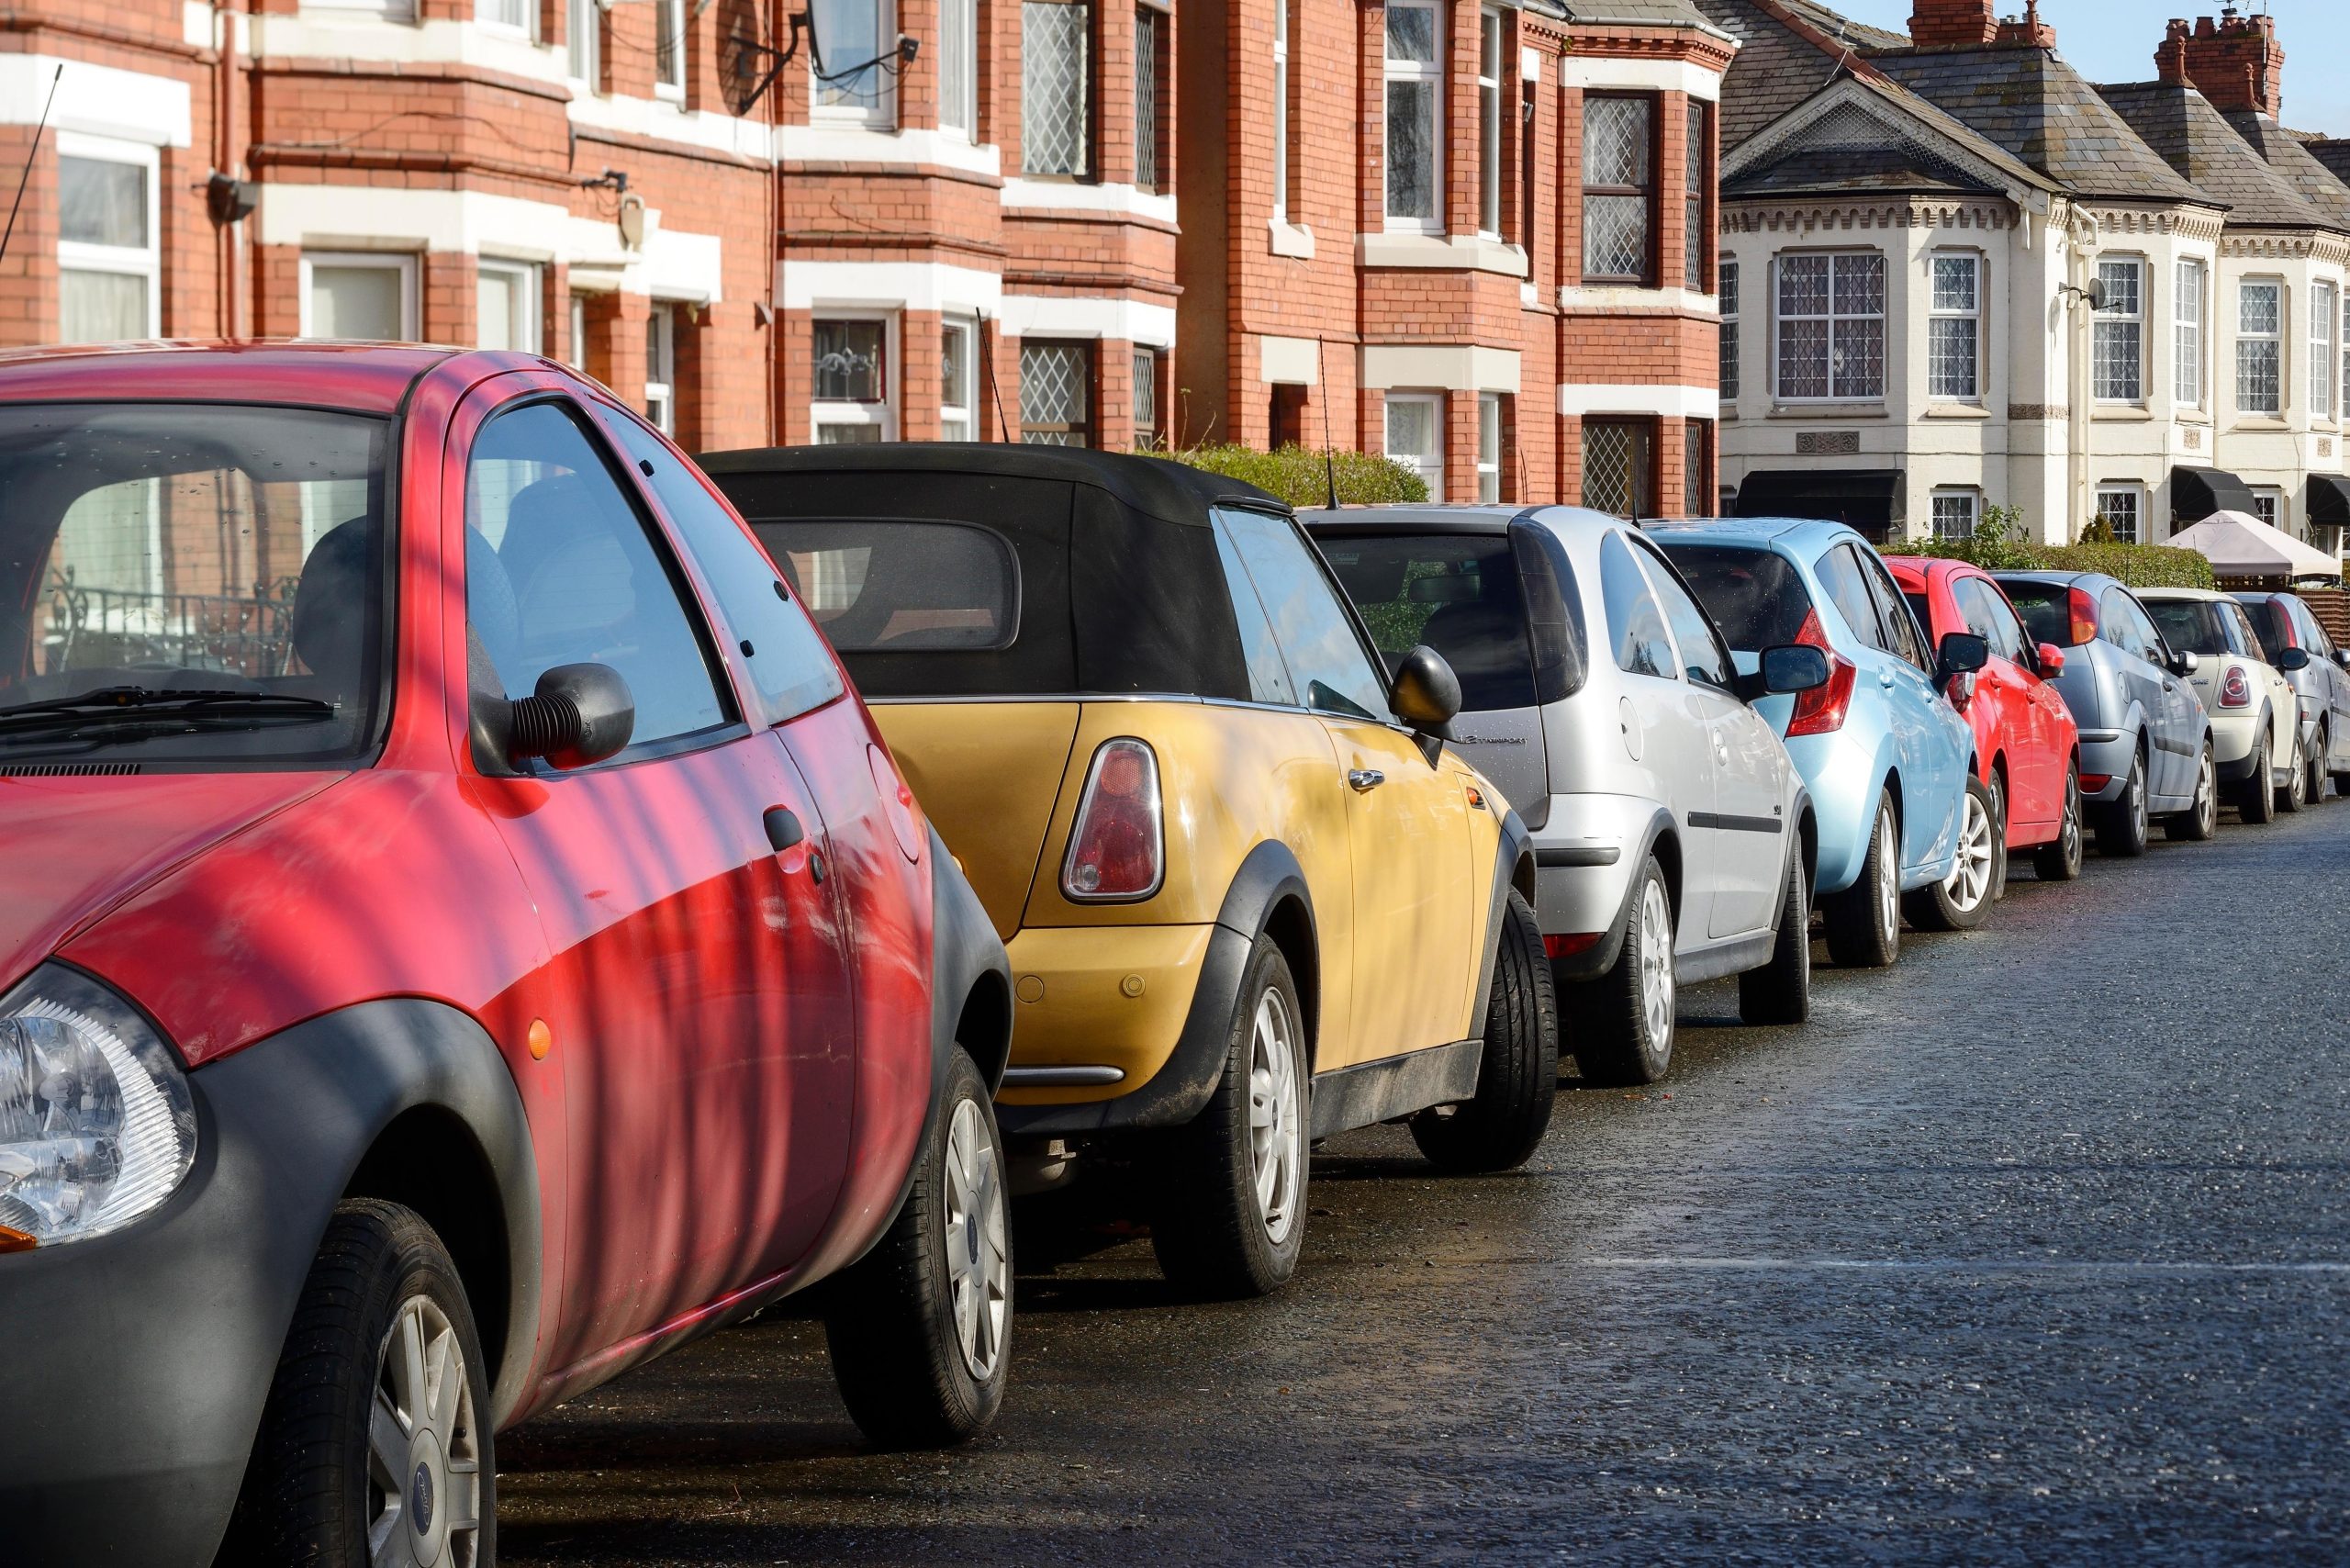 Car Insurers Under Pressure To Refund Drivers Unable To Use intended for dimensions 5200 X 3470